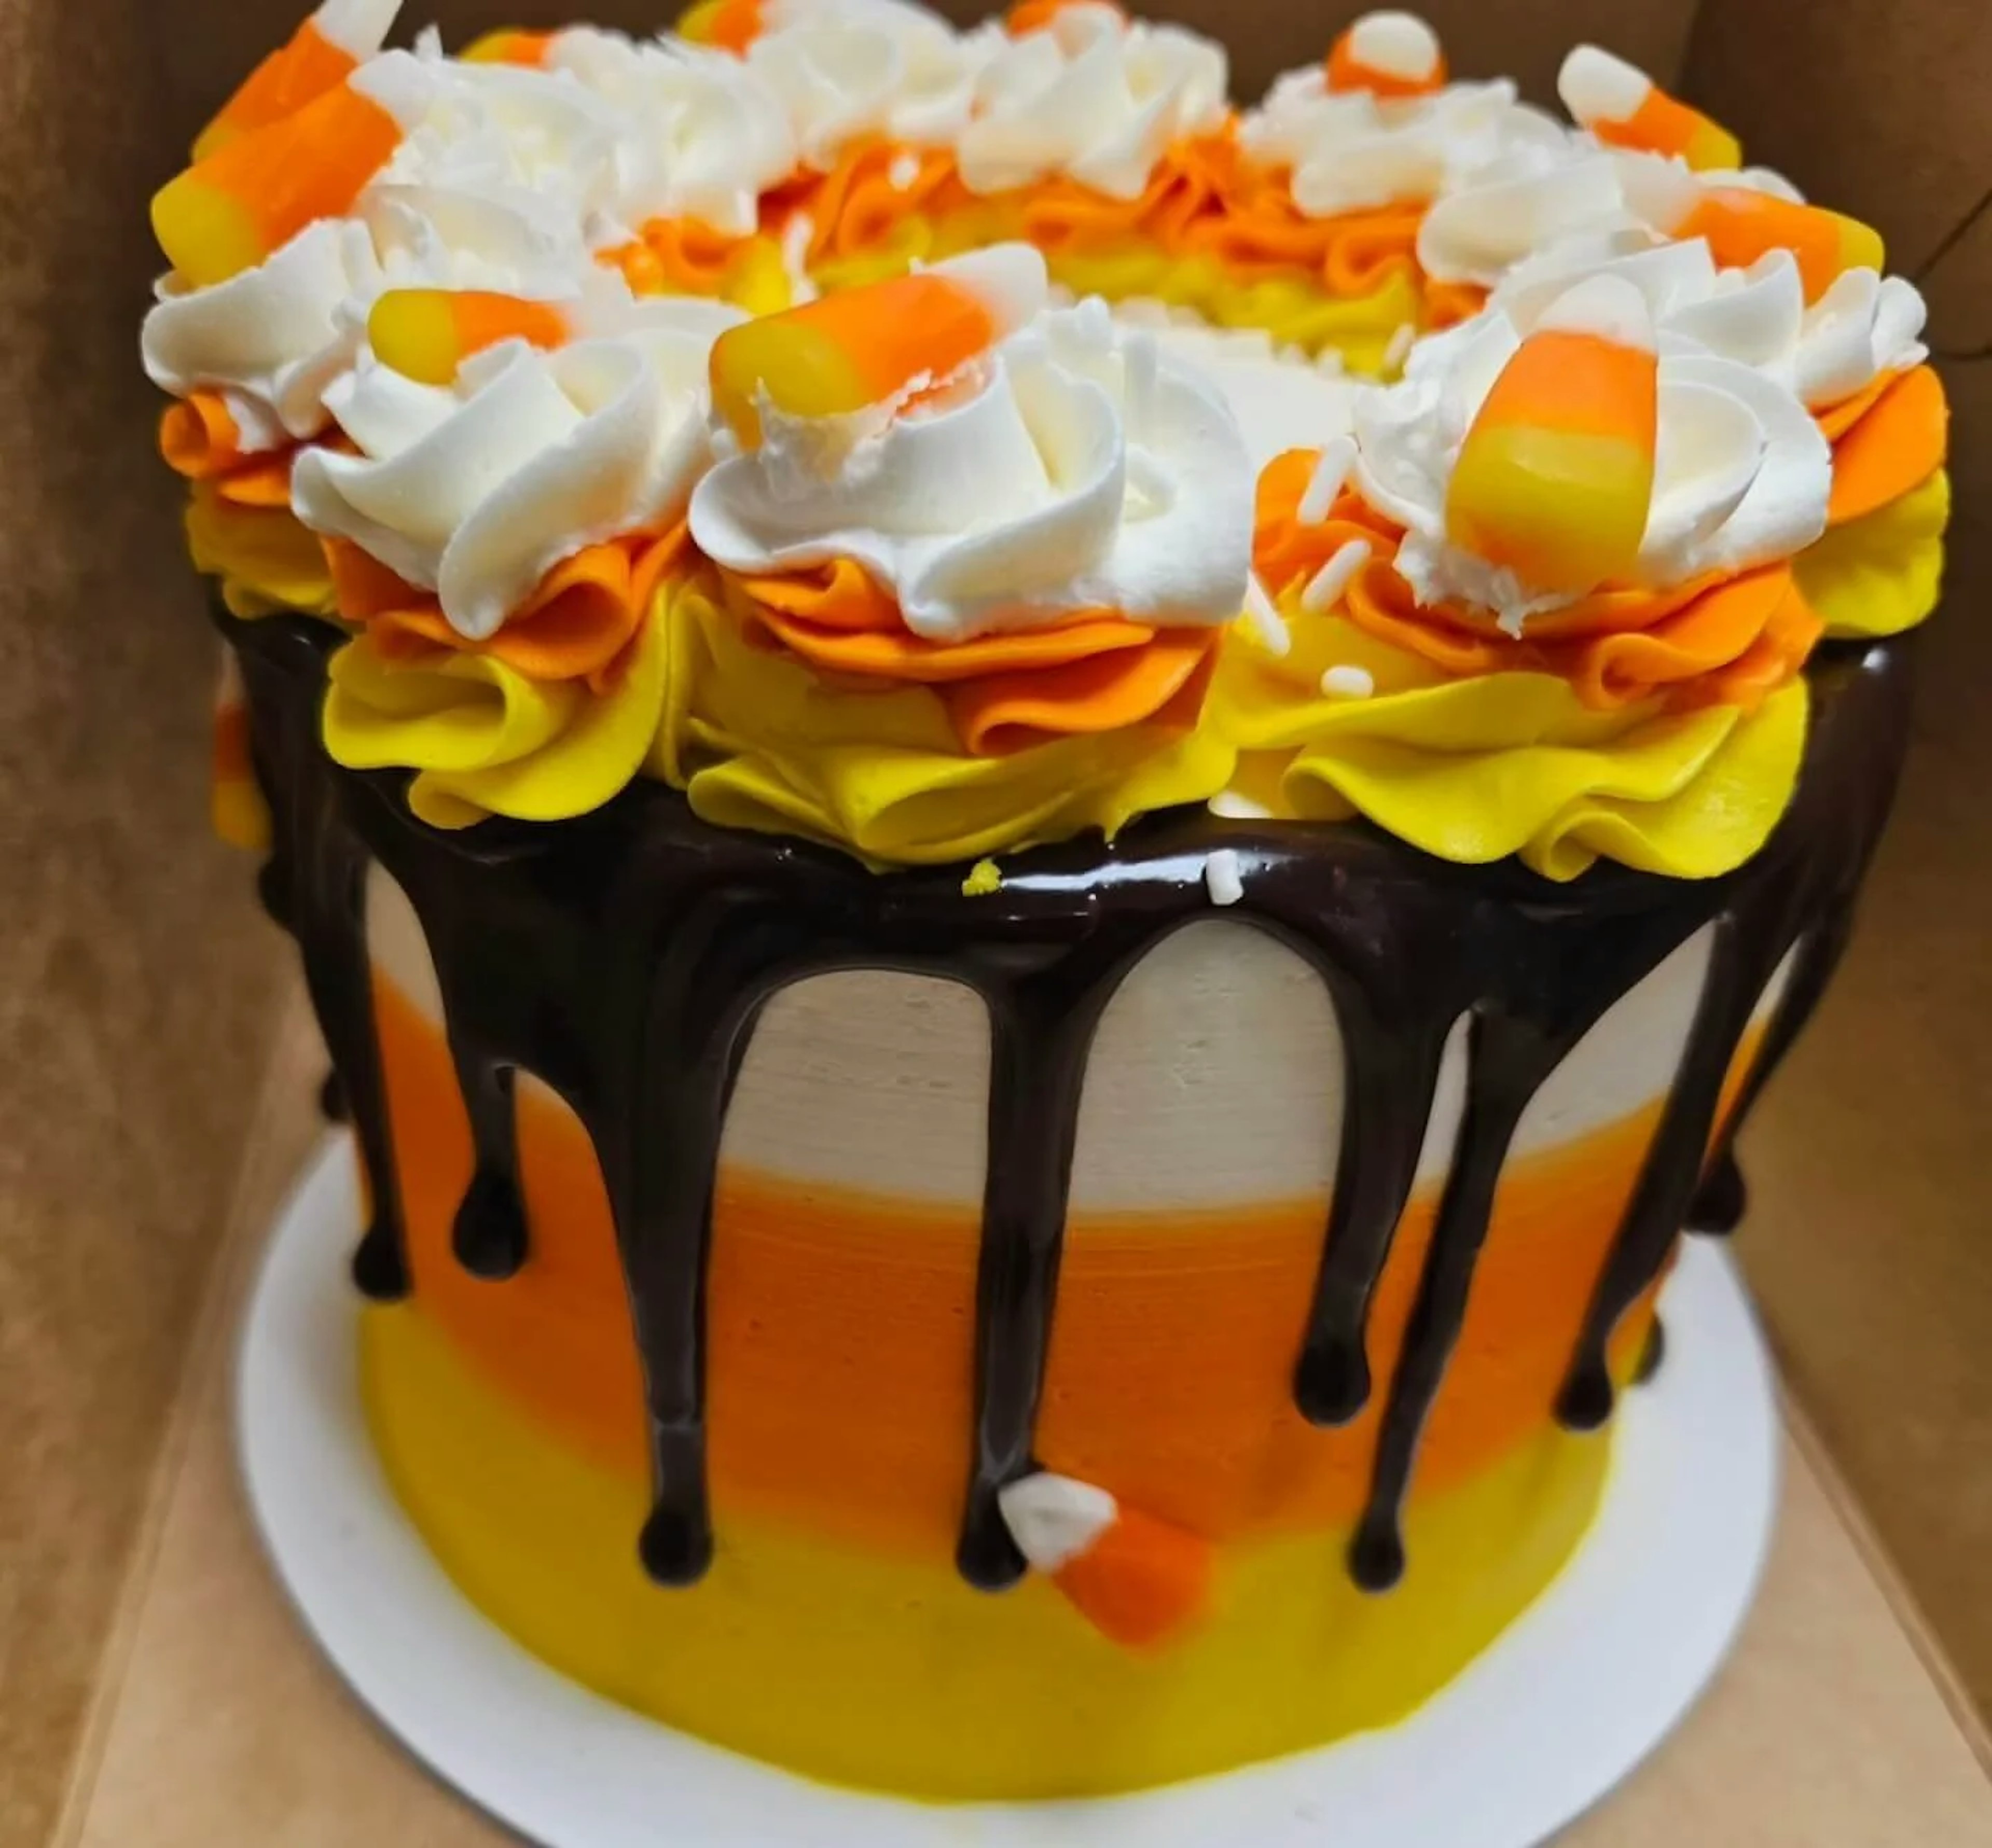 Orange and white cake a chocolate drizzle. Topped with candy corn.